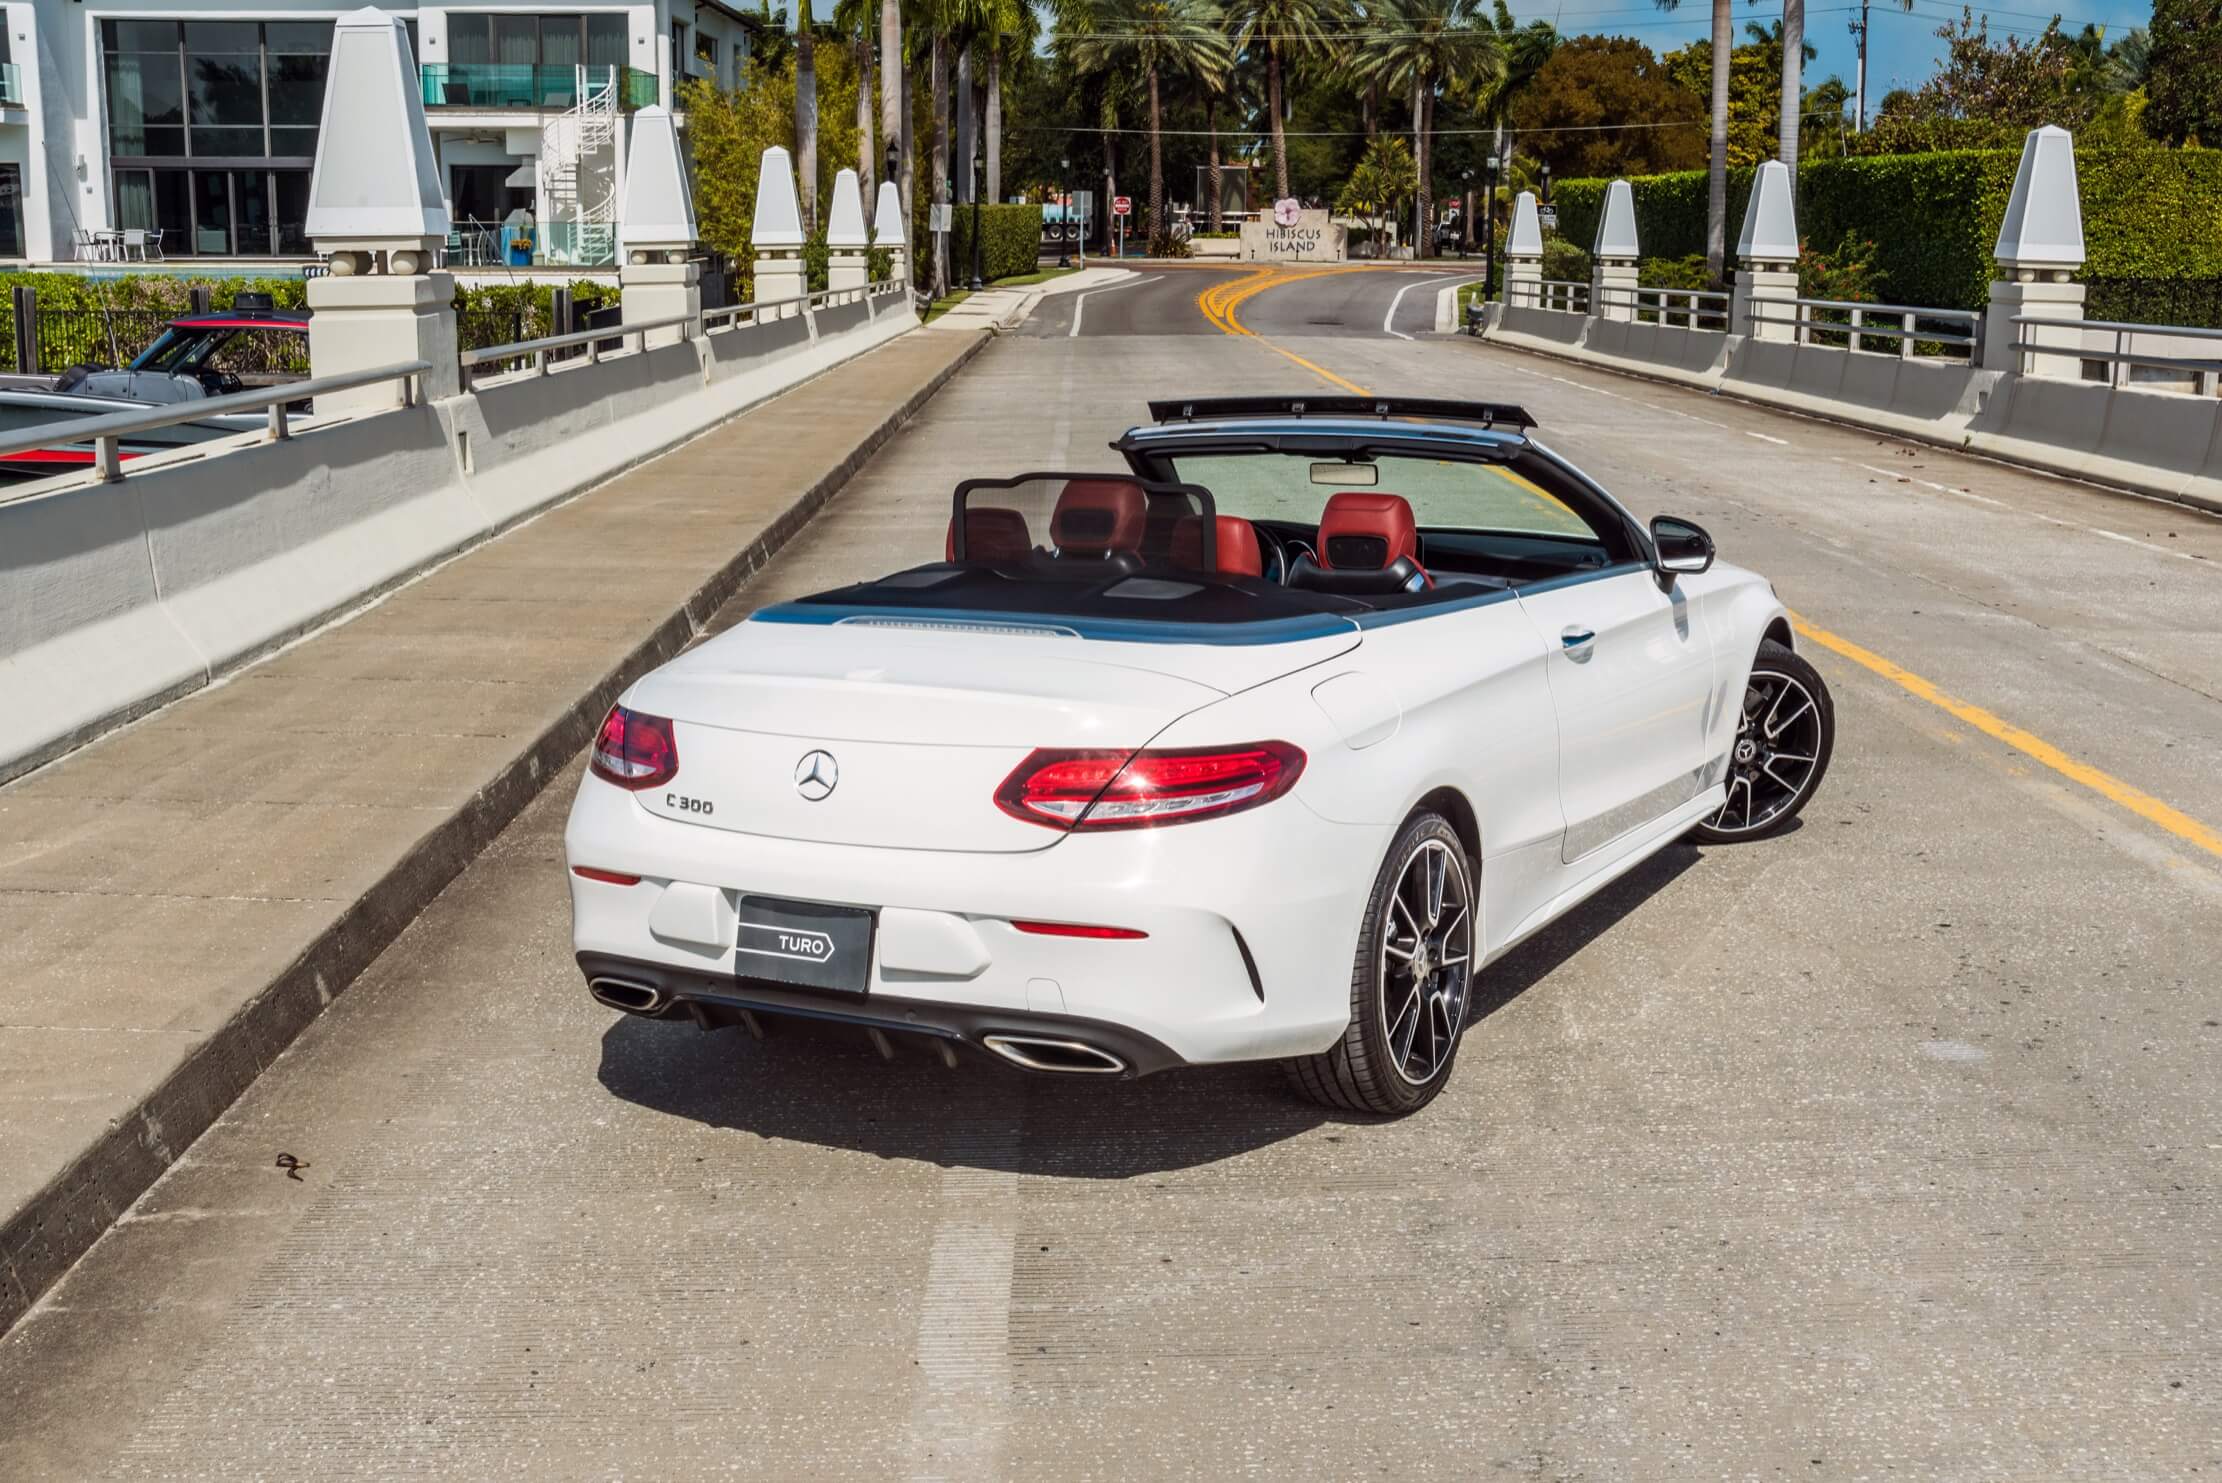 2019_MERCEDES BENZ_C300-CONVERTIBLE_WHITE-RED_75